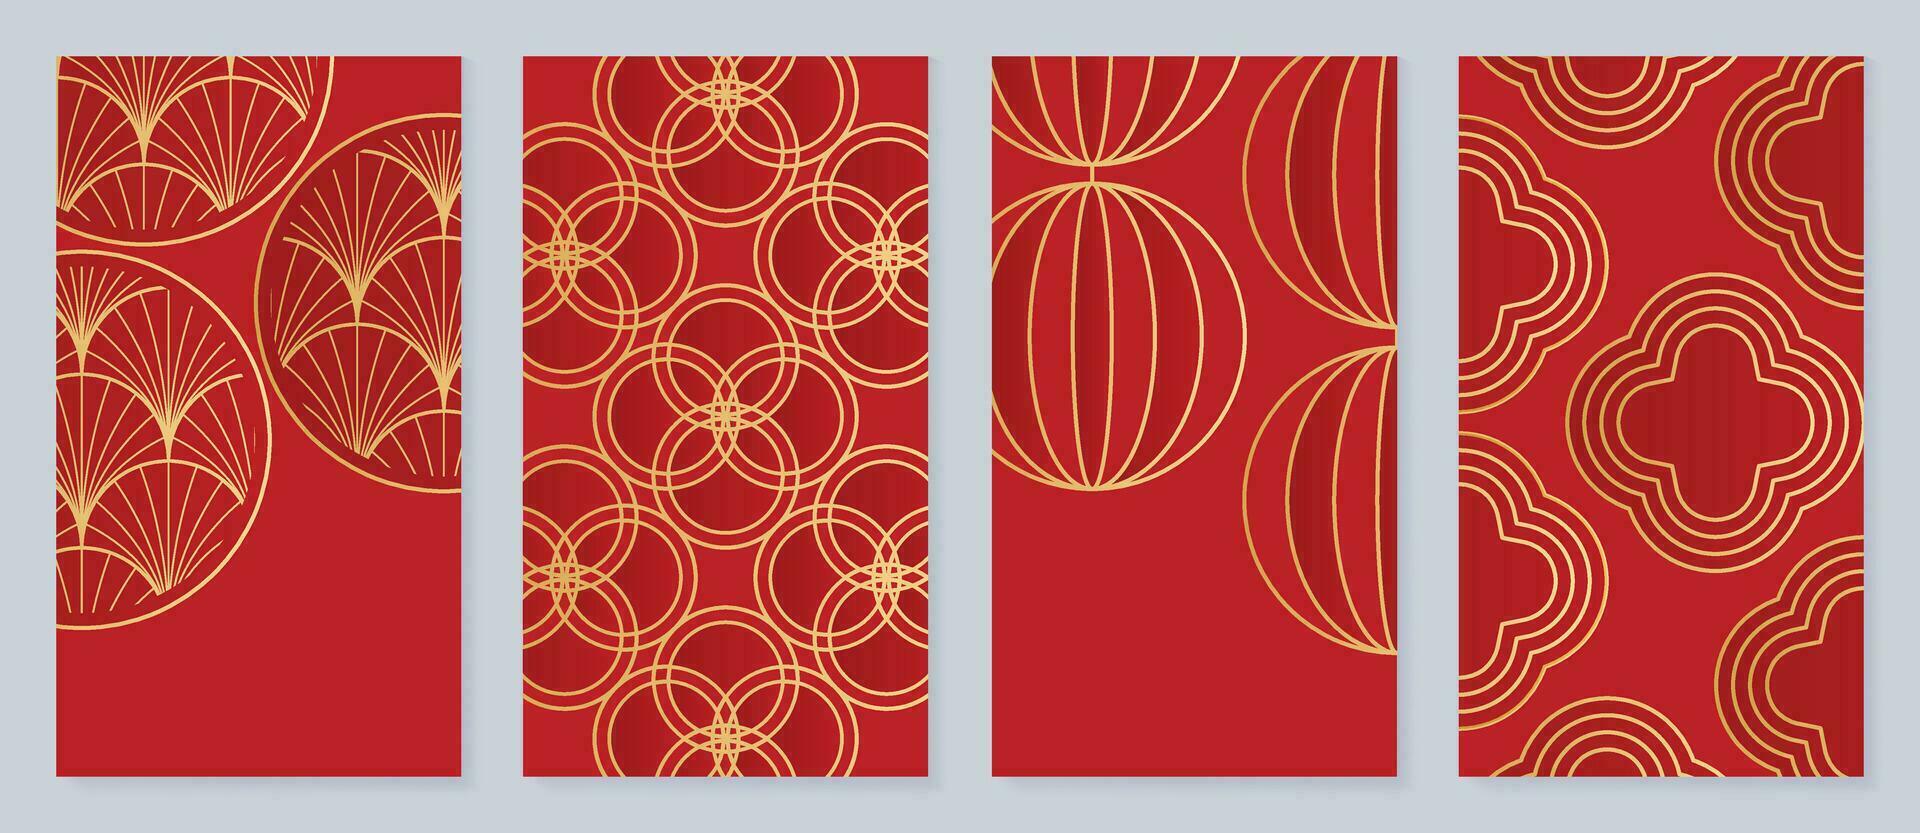 Chinese New Year 2024 card background vector. Year of the dragon design with golden lantern, flower, chinese pattern. Elegant oriental illustration for cover, banner, website, calendar, envelope. vector